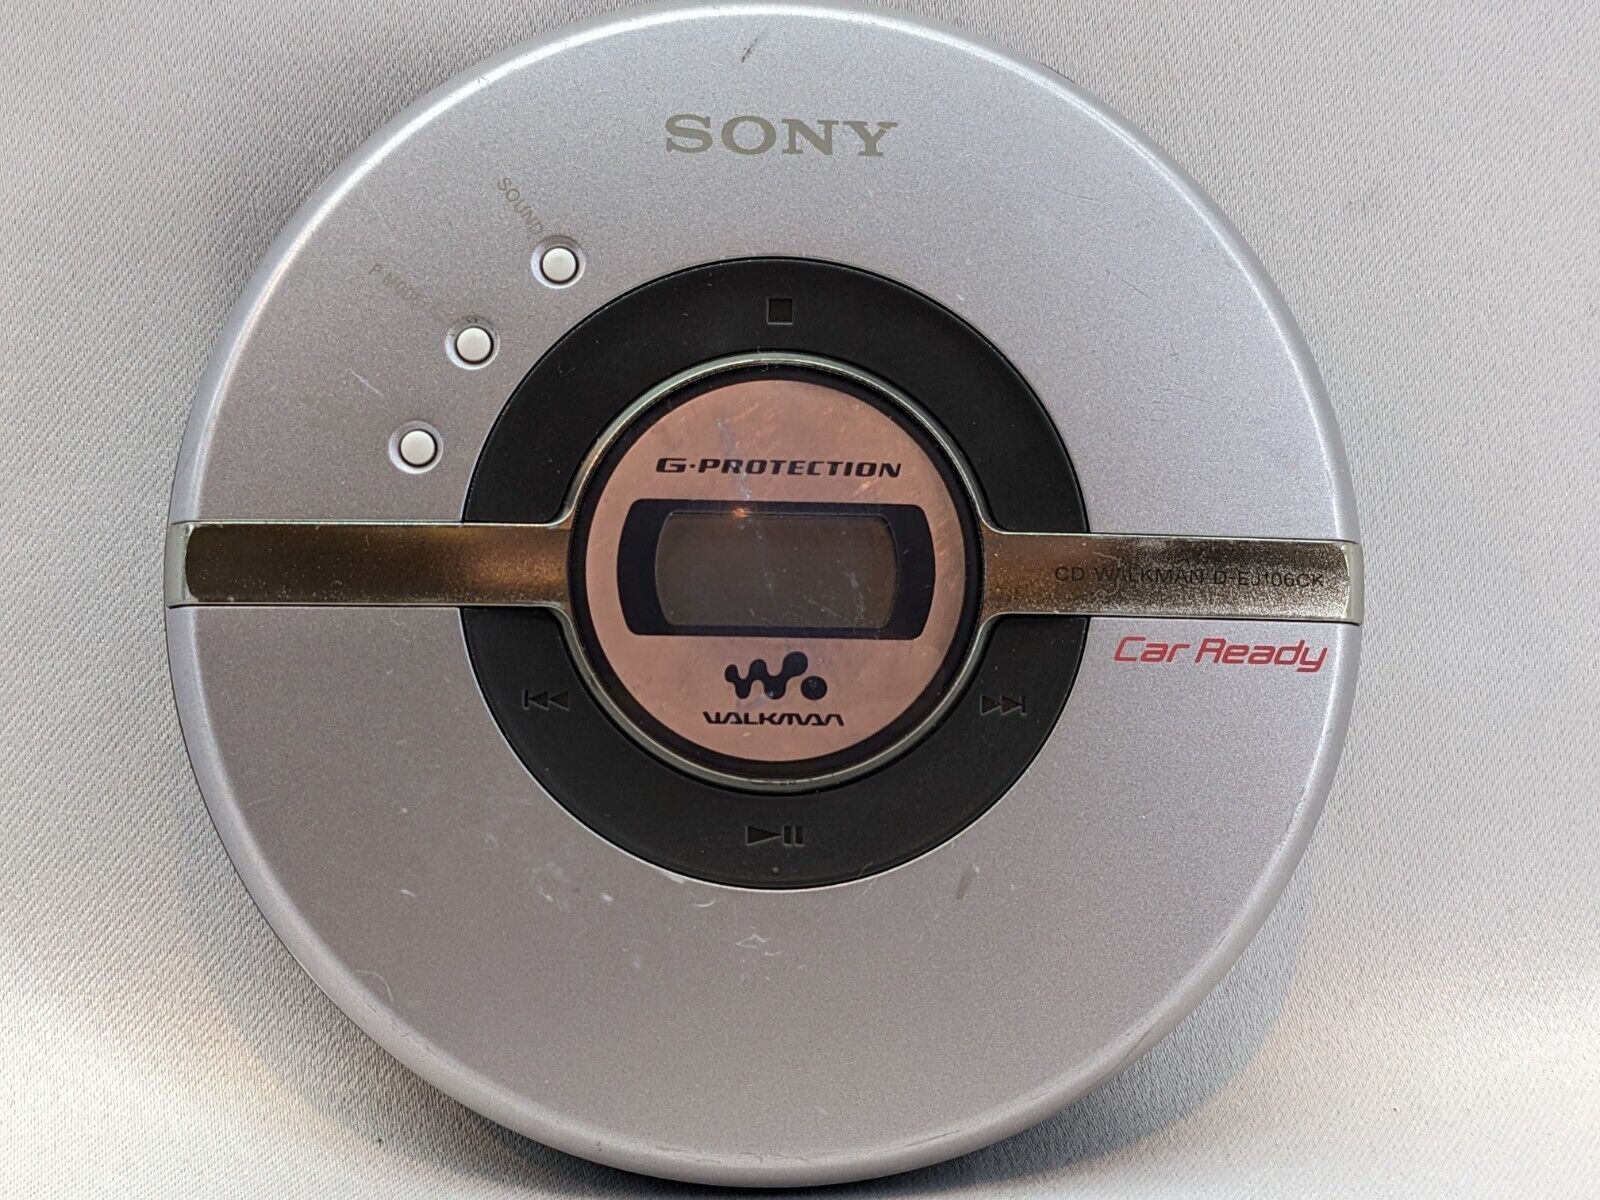 Sony D-EJ106CK Silver CD Walkman Portable CD Player G-Protection - For Parts (A) - $7.99